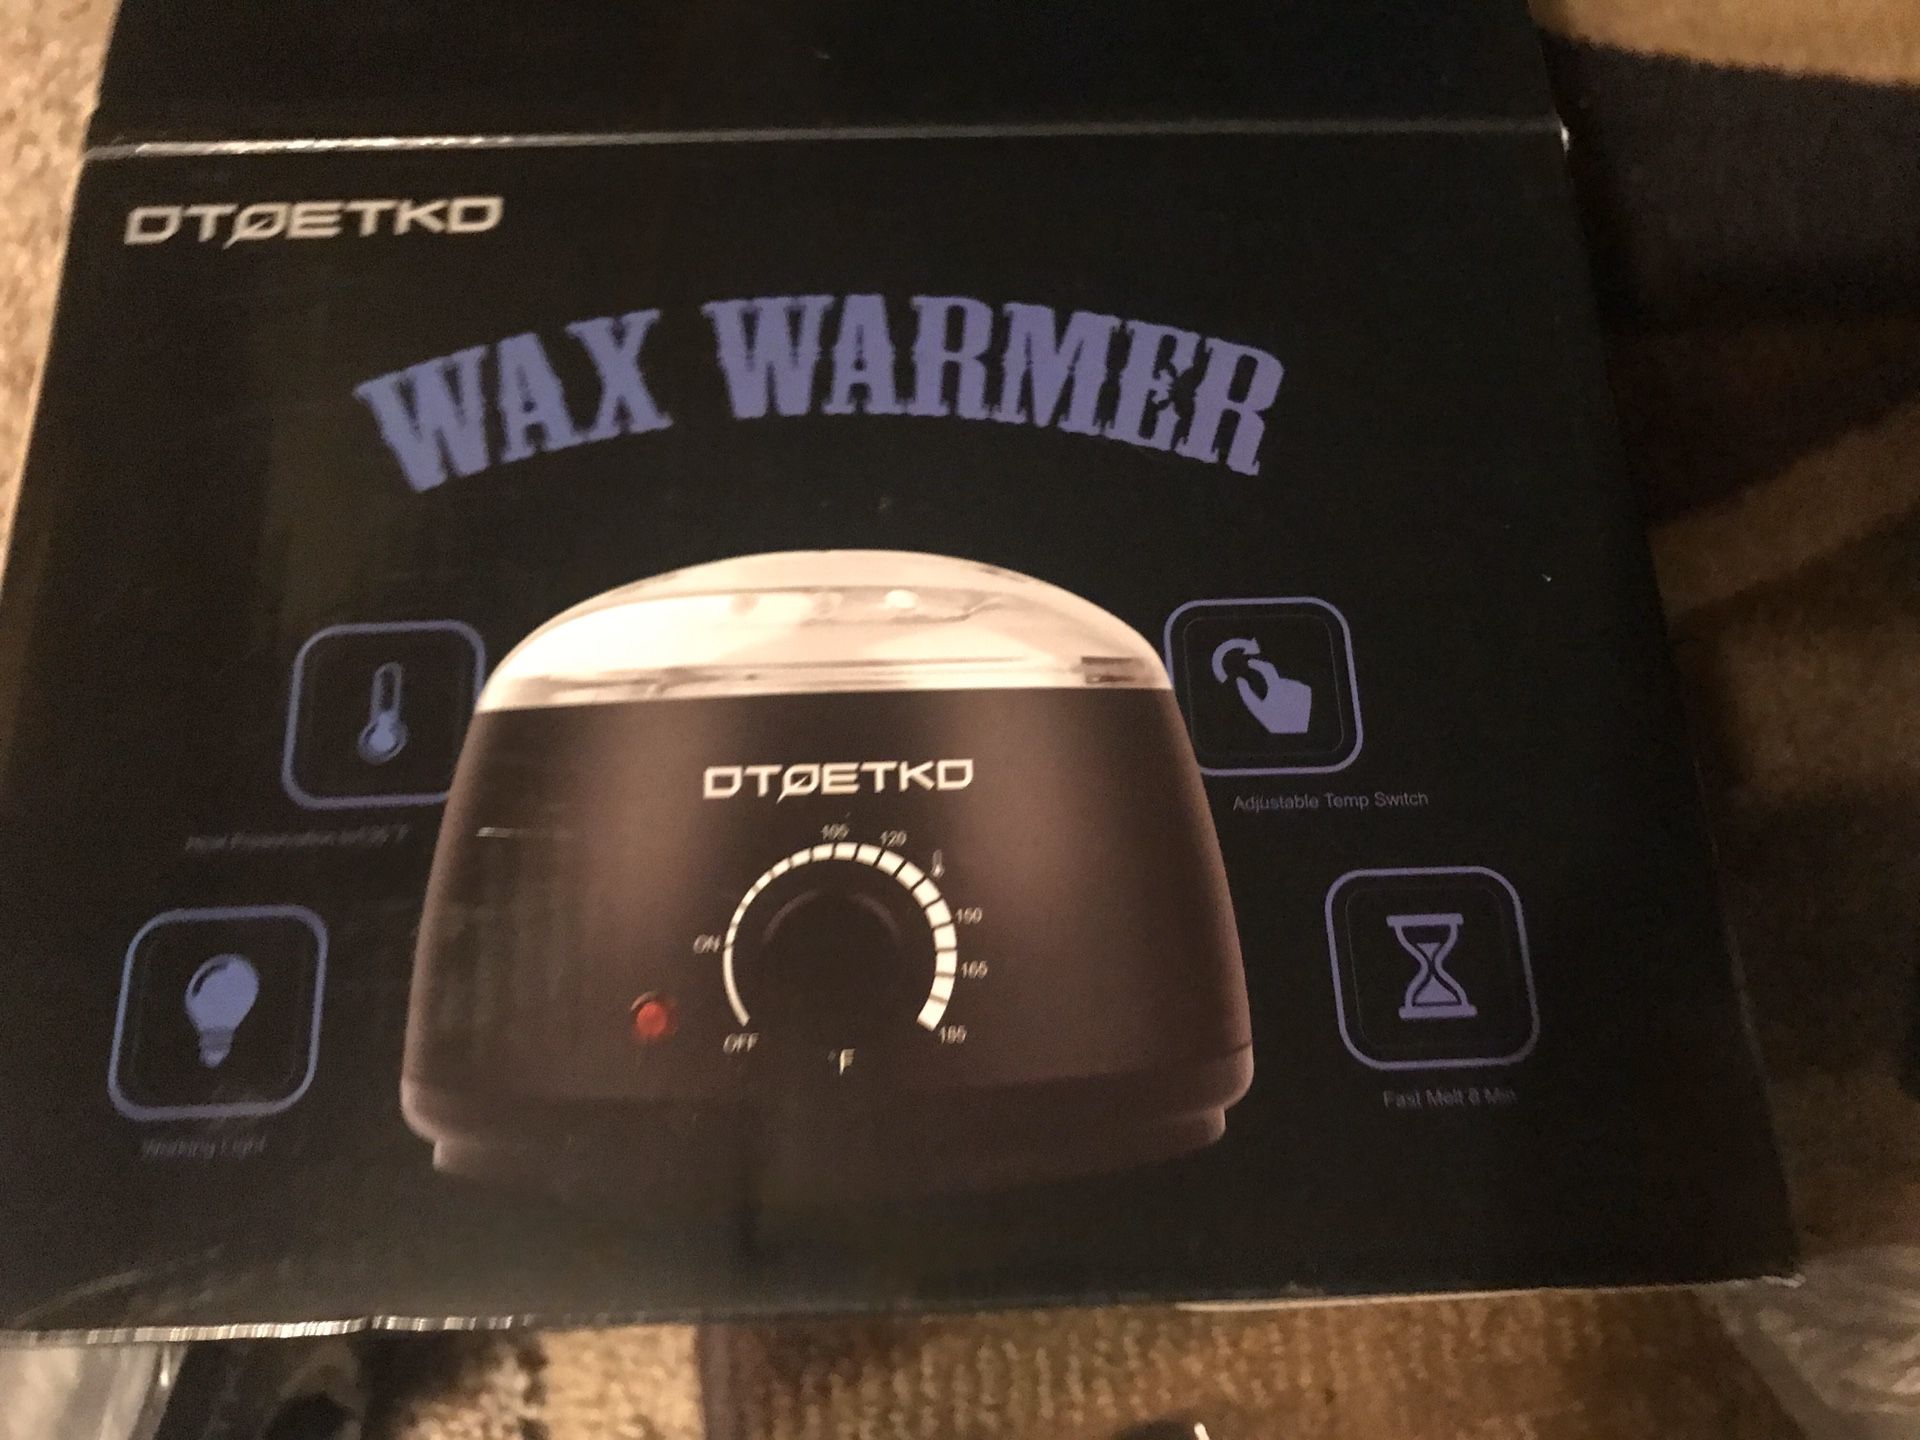 Brand New Wax Warmer for hair removalReduced price